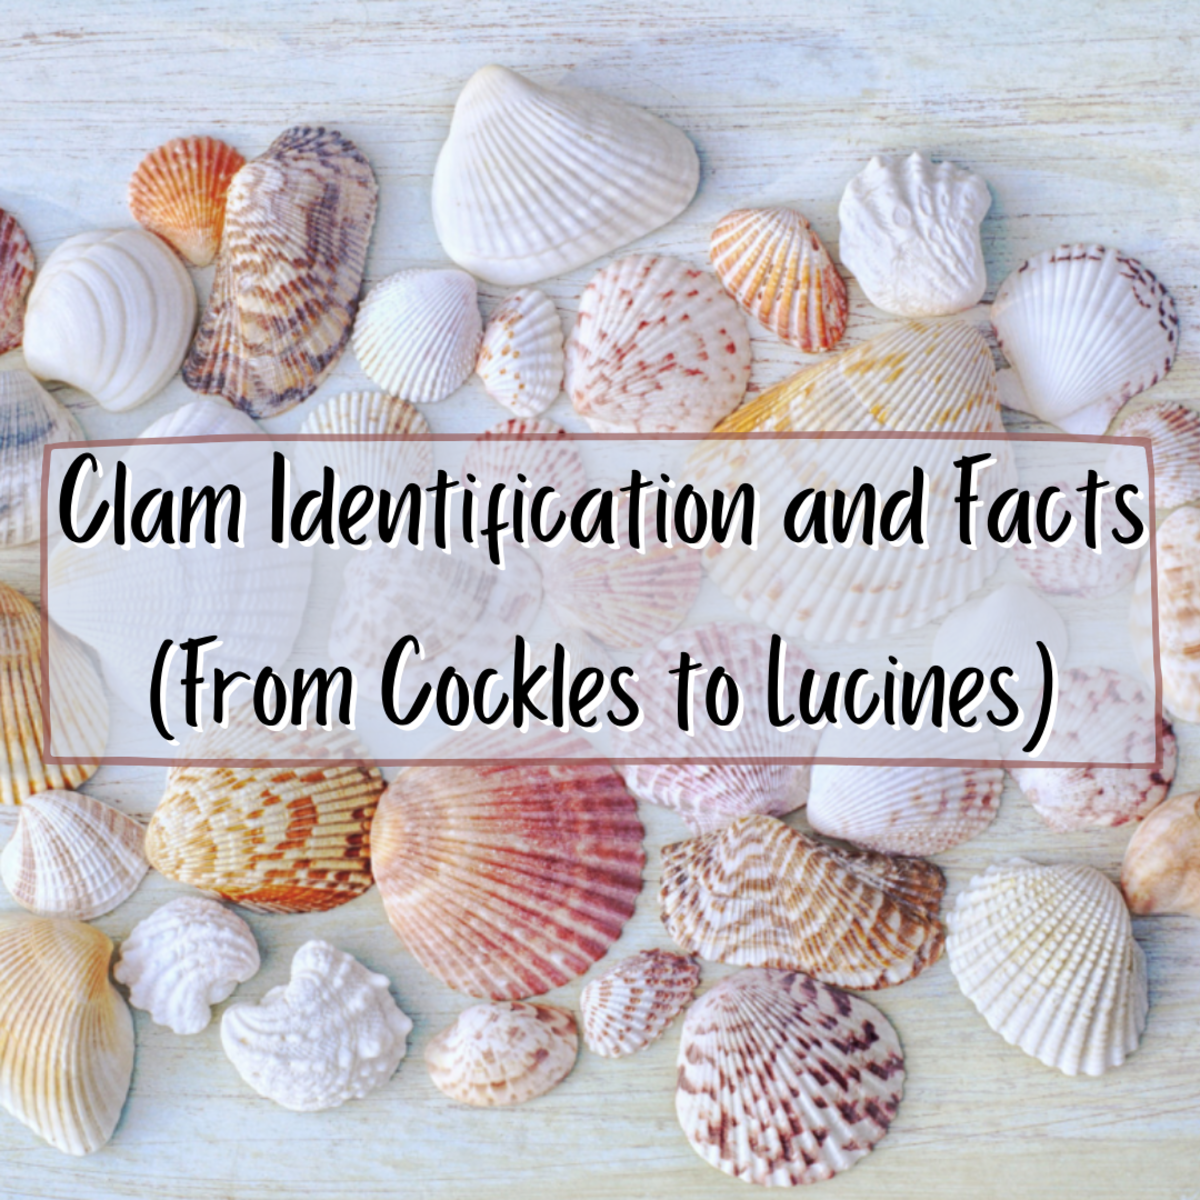 Read on to learn all about a variety of clams, from cockles to lucines. You'll find helpful identifying information, interesting facts, and original photographs.